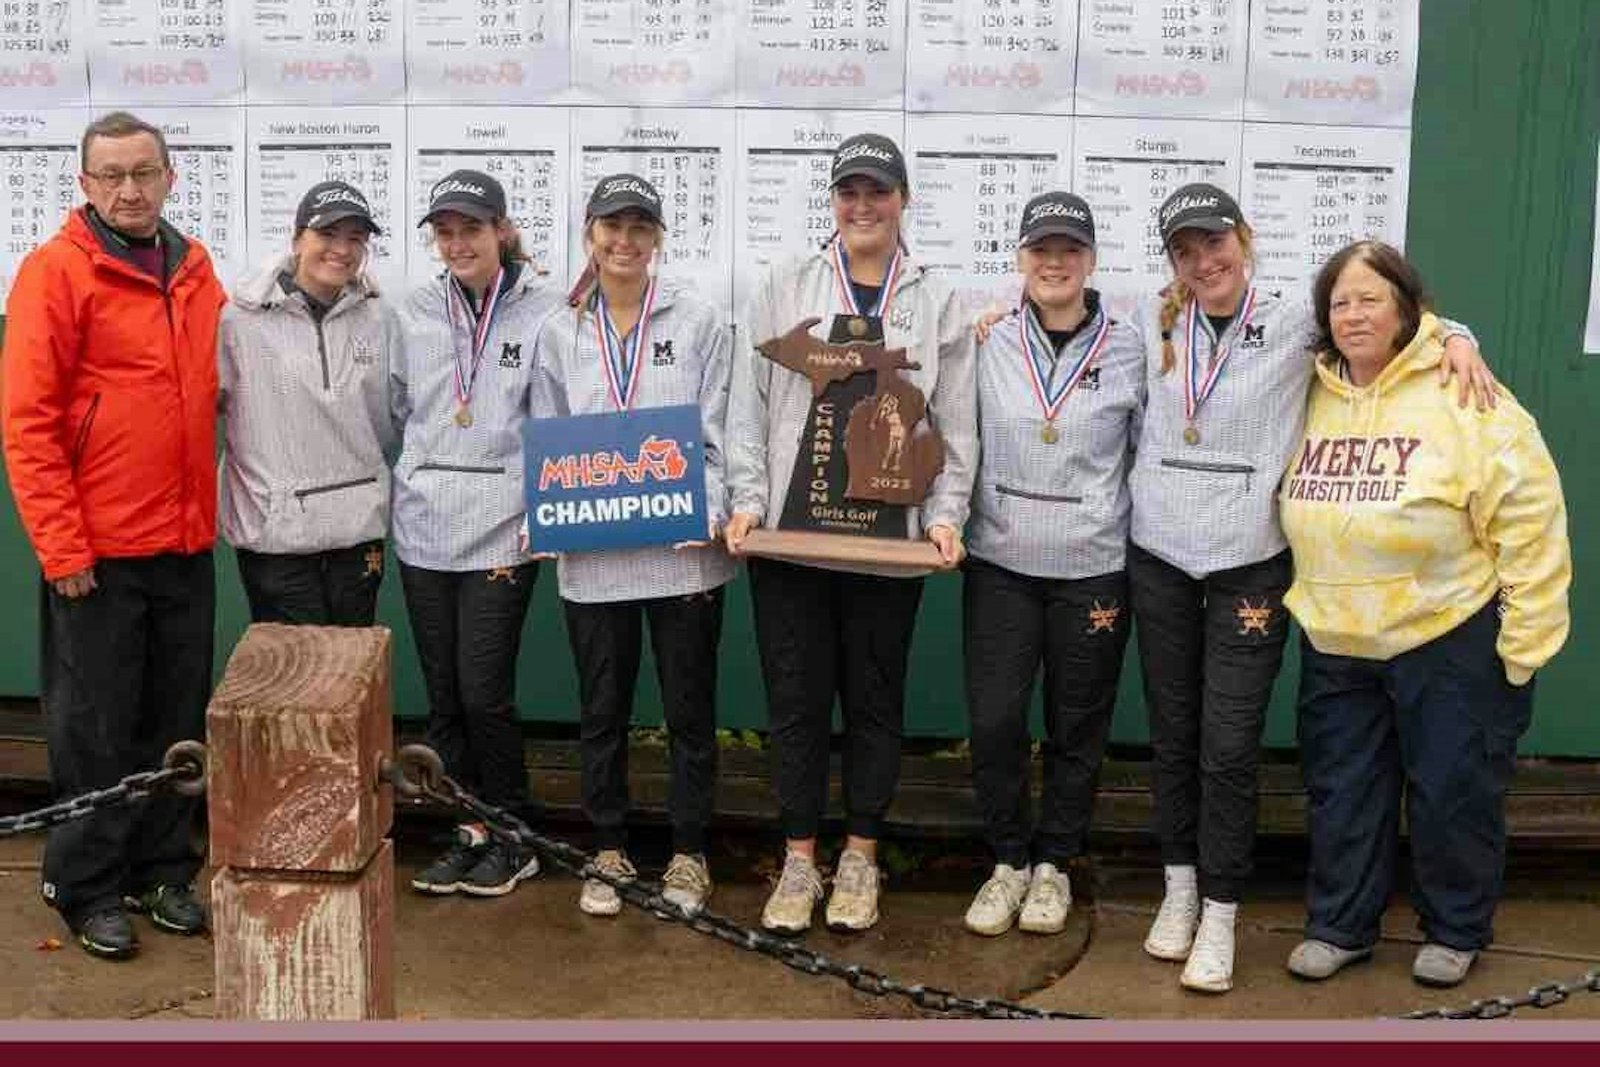 Mercy’s repeat MHSAA Division 2 girls golf champions: Assistant coach Rich Mardeusz, junior Rayna Salazar, junior Marie Schueneman, senior Brinlee Nay, senior Abby Slankster, junior Macy Morphew, junior Lila Polakowski, coach Vicky Kowalski. Missing is junior Maeve Casey because after scoring 73 on Friday she got on a plane to play AAA hockey in Minnesota. (Photo courtesy of Mercy Athletic Department)